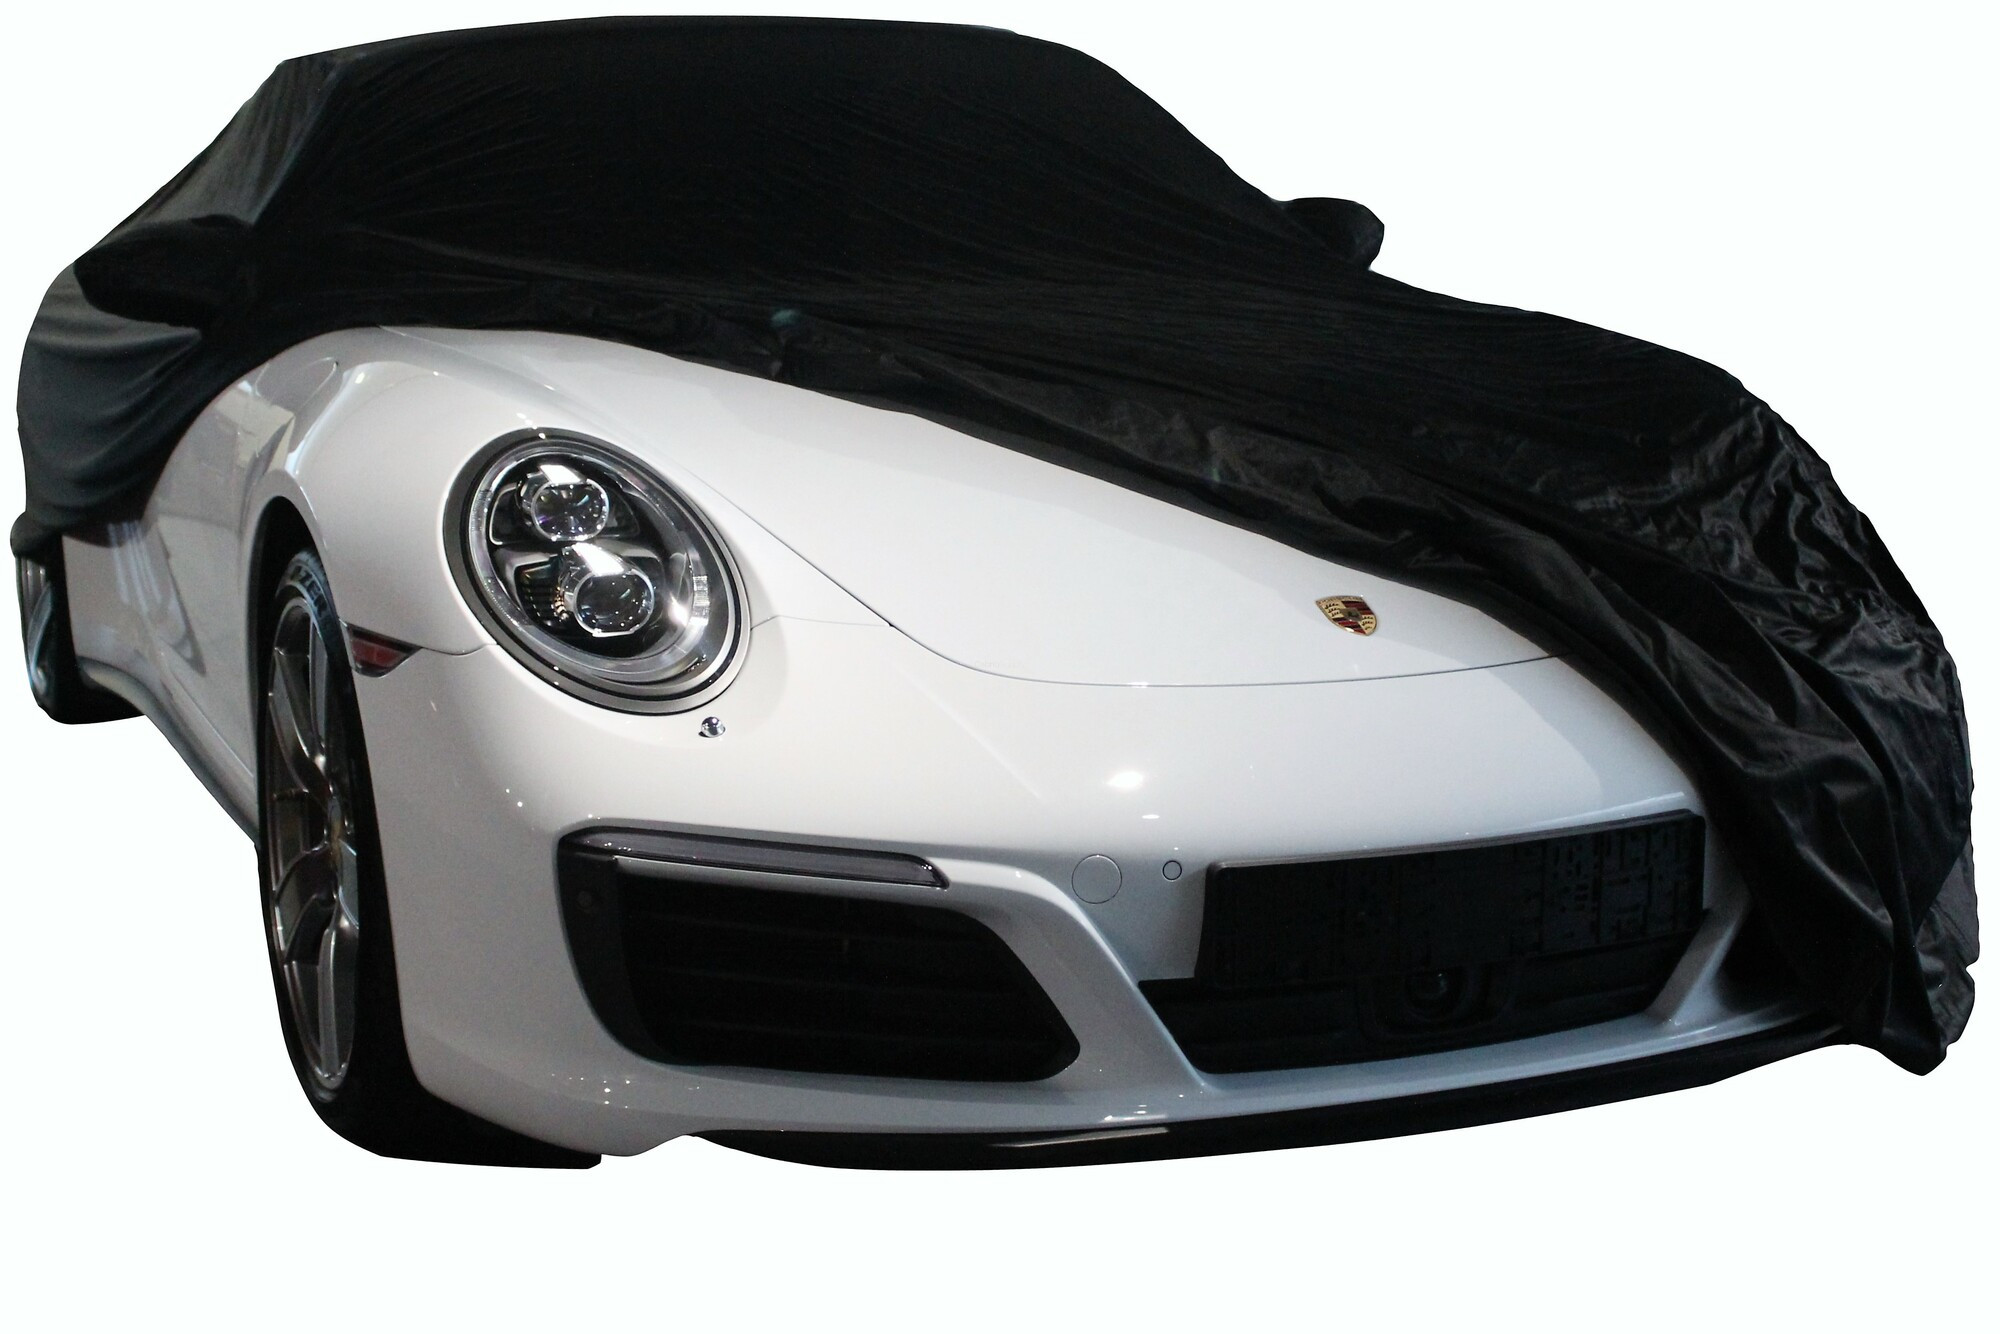 Create your own indoor cover fitted for Porsche 911 (992) Aerokit  2019-present